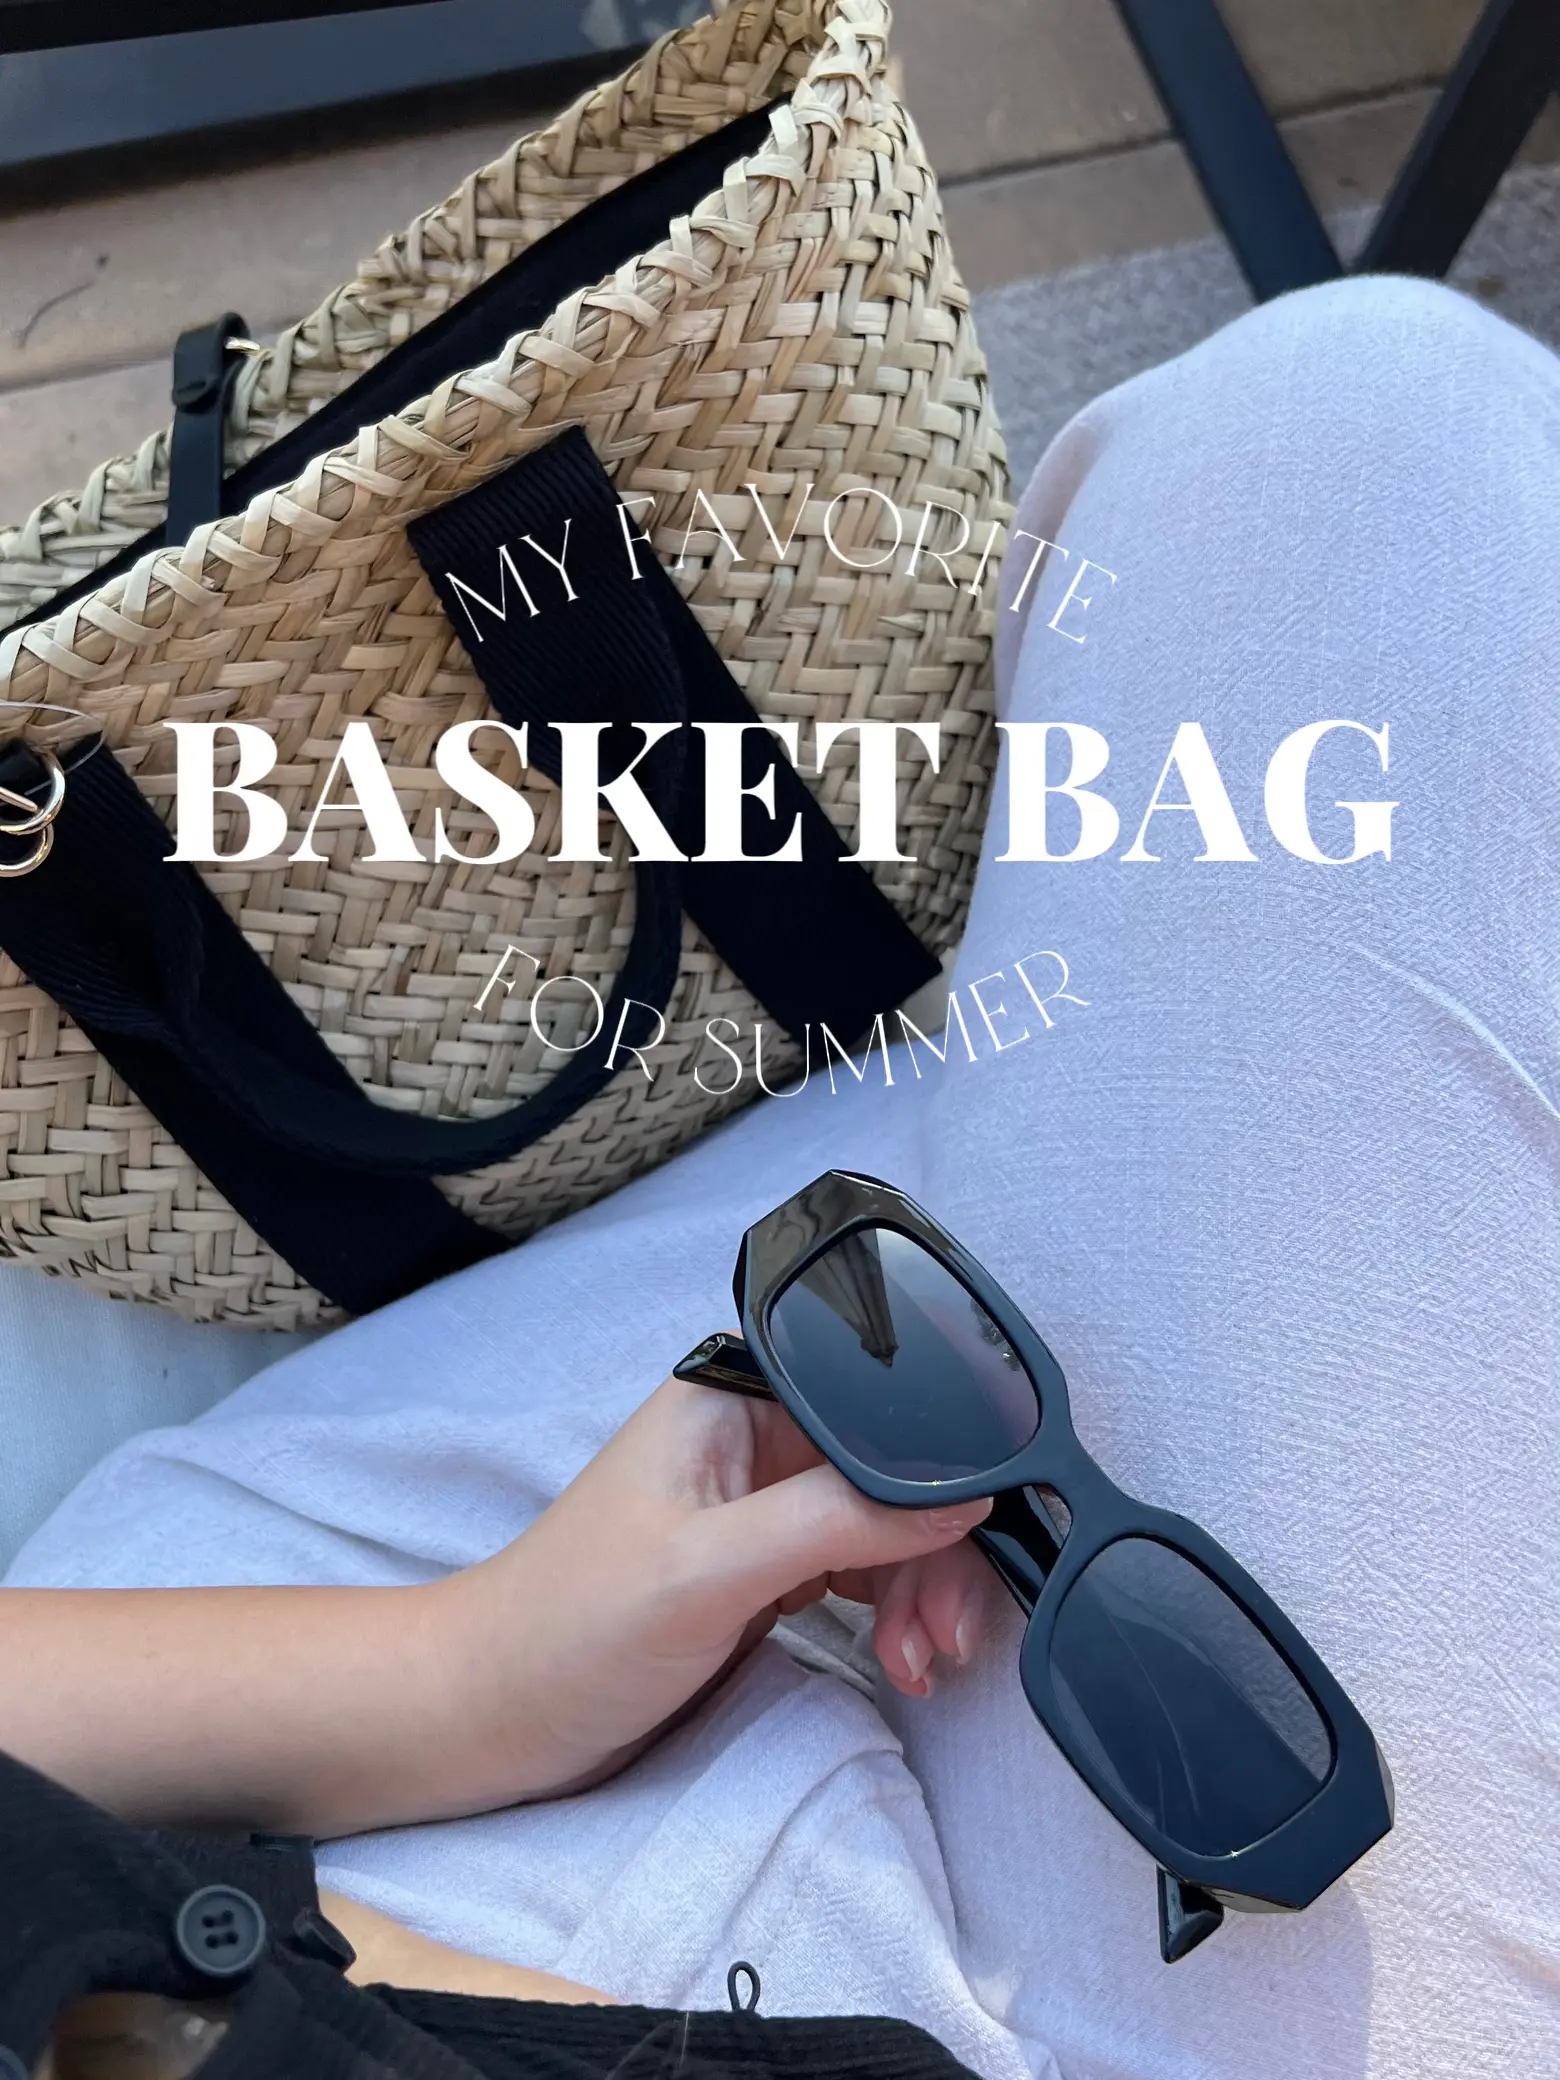 My favorite  bag purchases  Gallery posted by nataliebrekka